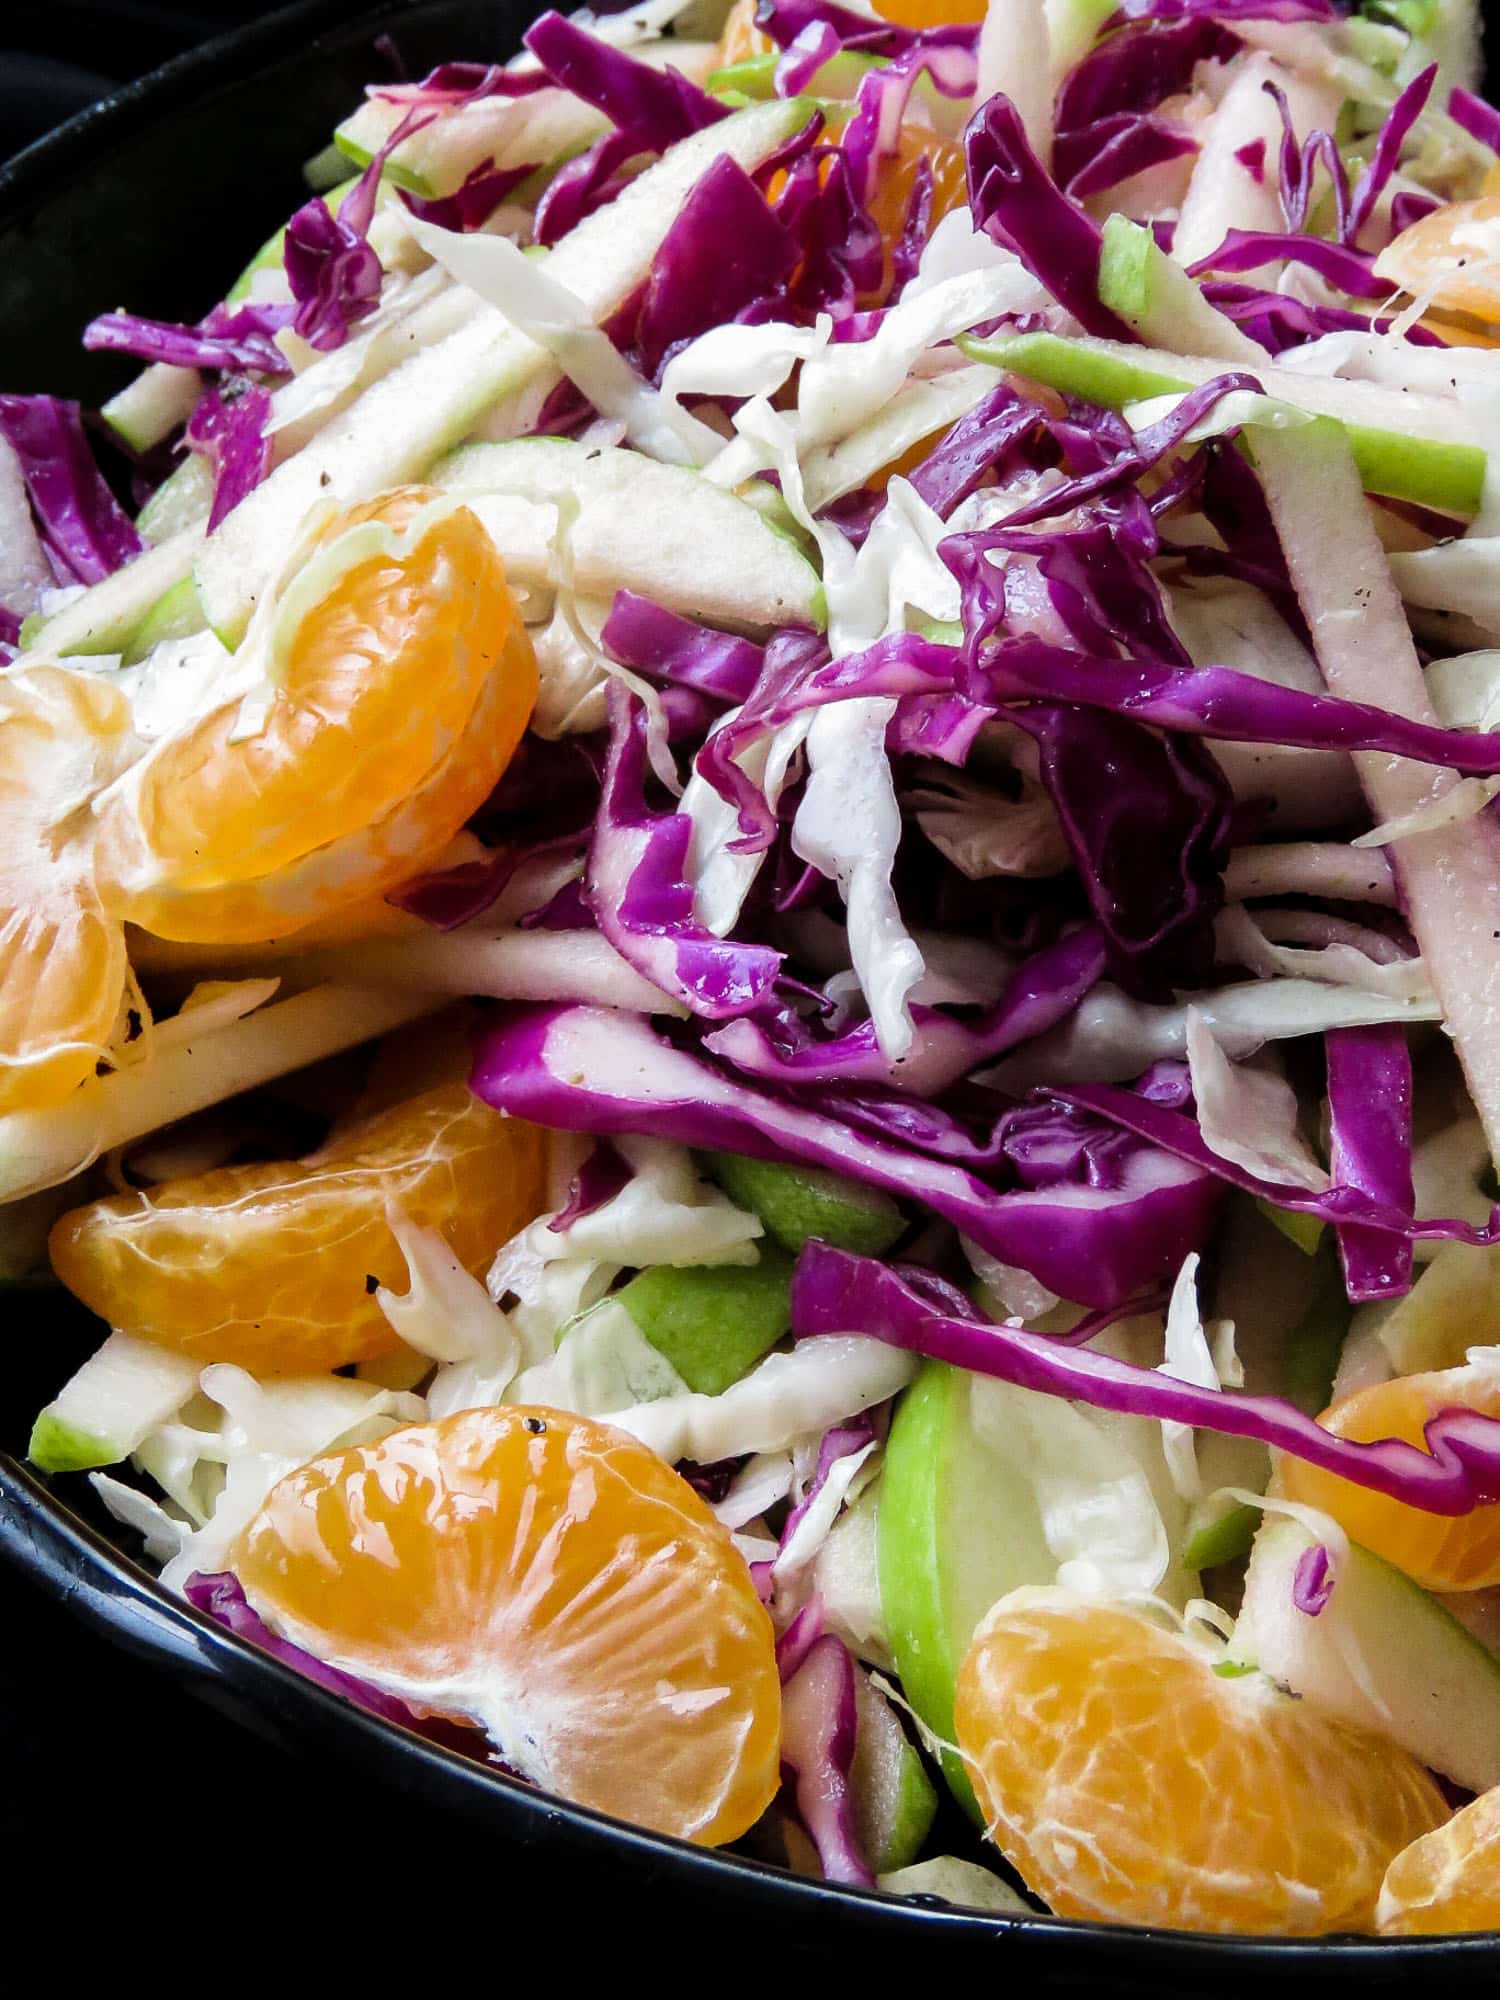 Raw cabbage and apple coleslaw with orange-honey vinaigrette- a crunchy vegan, vegetarian, gluten-free, easy salad that's not only healthy but makes a lovely colorful addition to your table. my kids loved it and hopefully, yours will too.